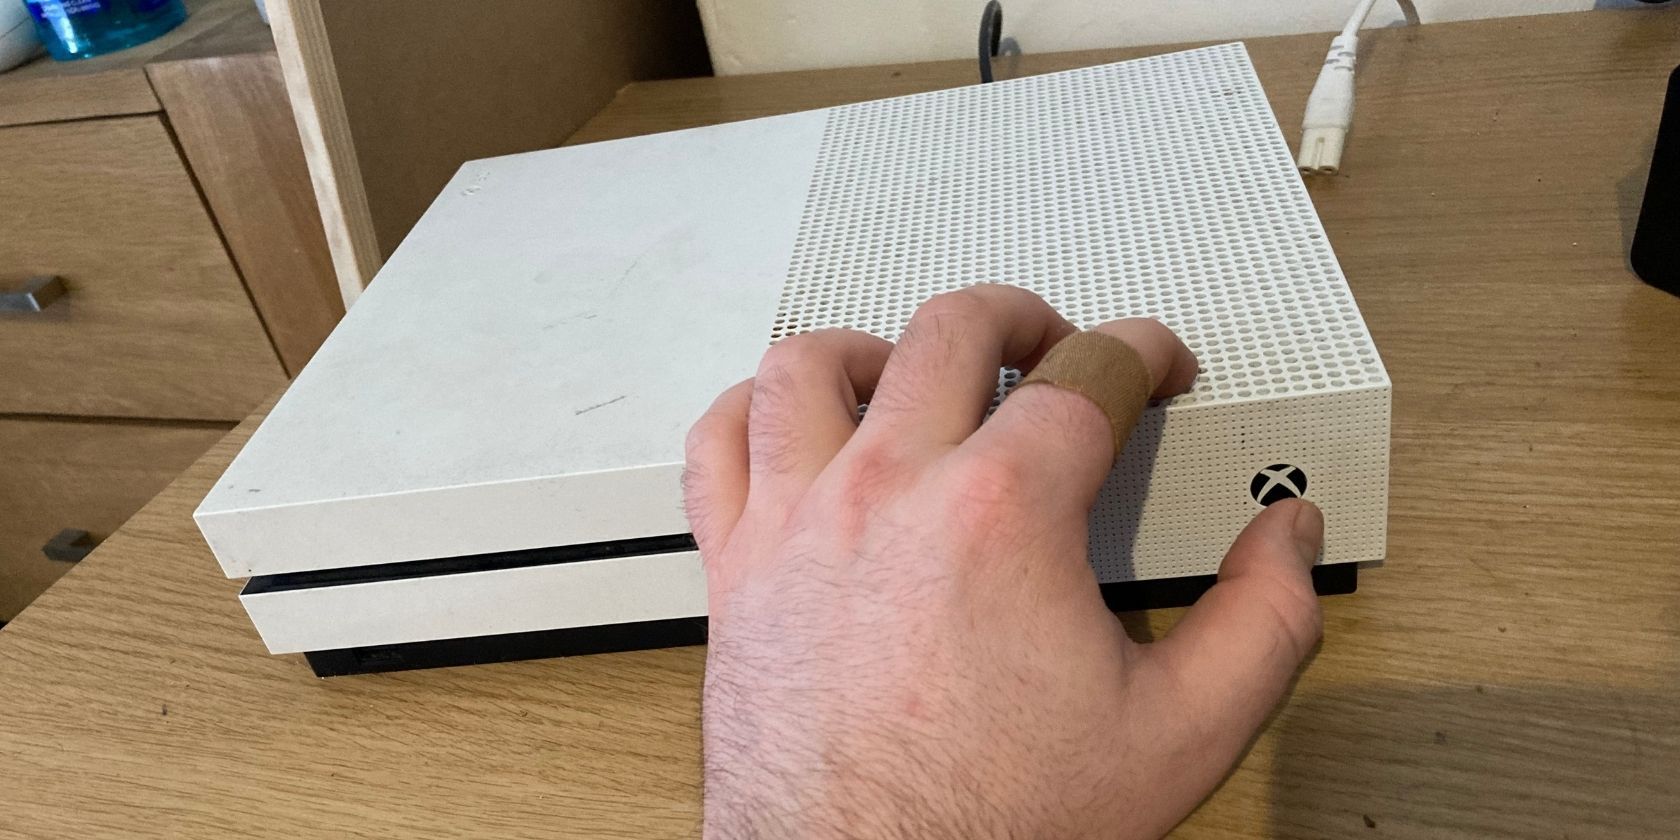 A disconnected Xbox One about to have its Power button pressed.